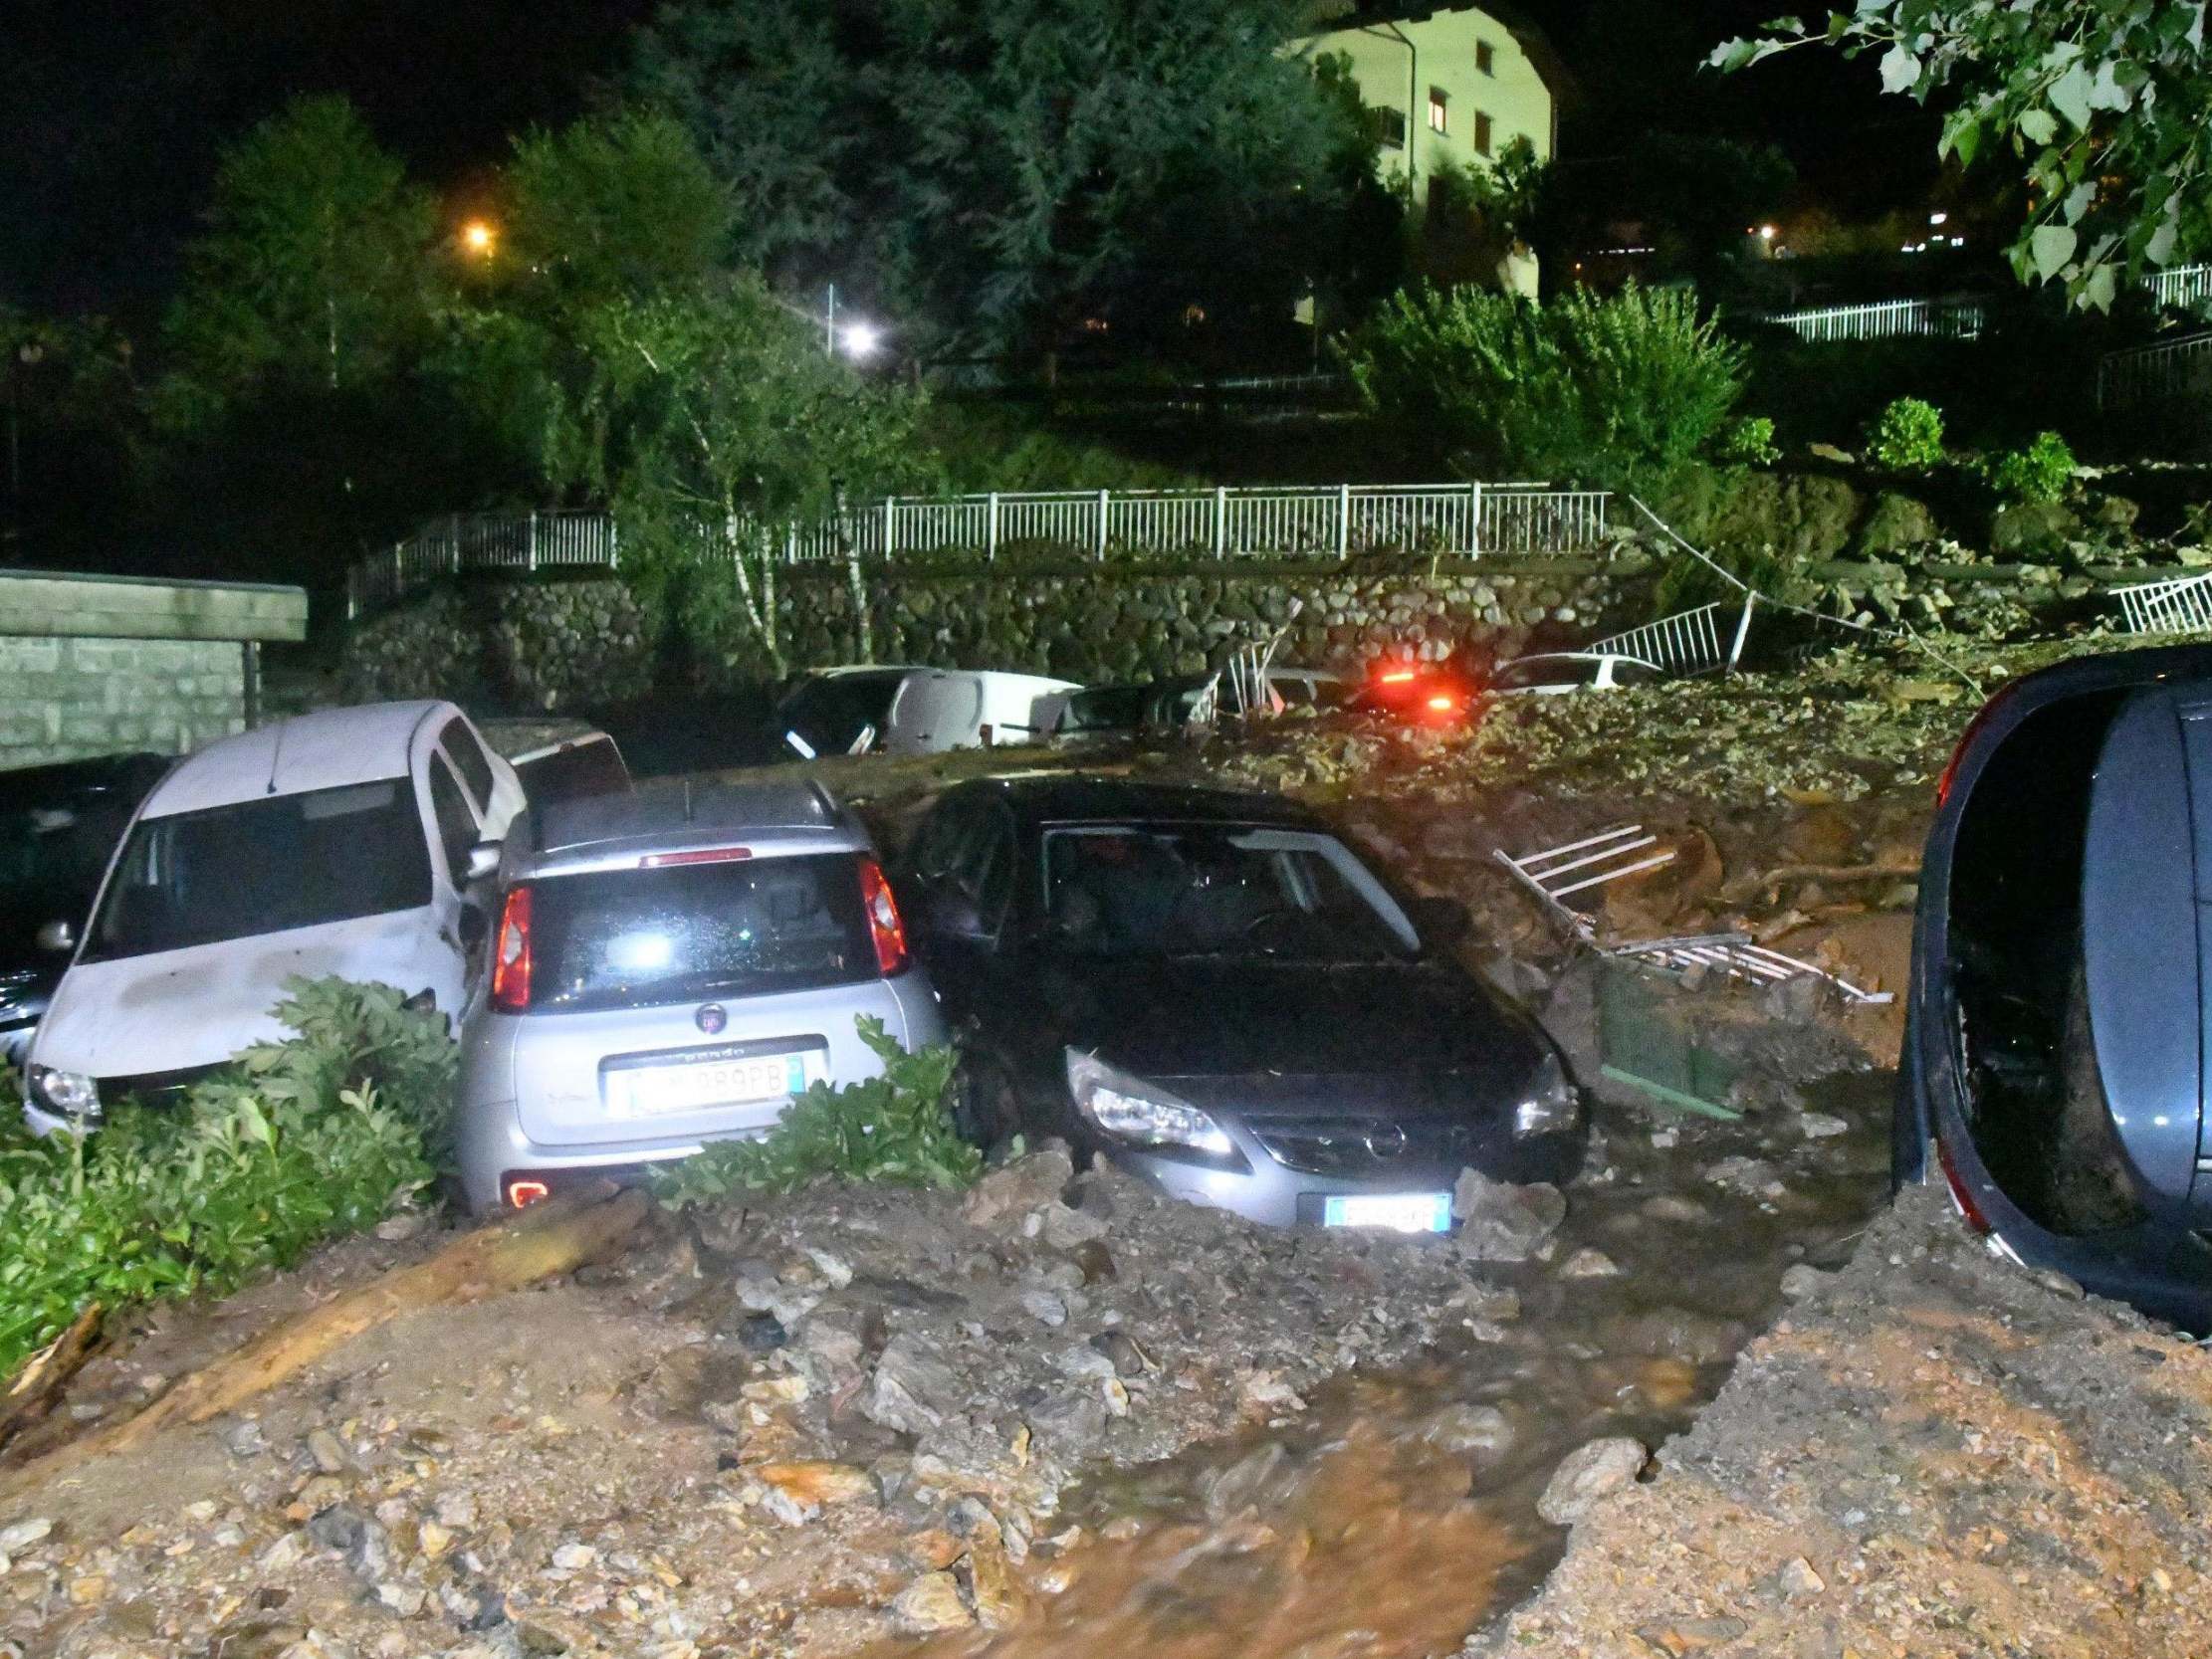 Wrecked vehicles in Casargo, Lecco, Italy, on 7 August